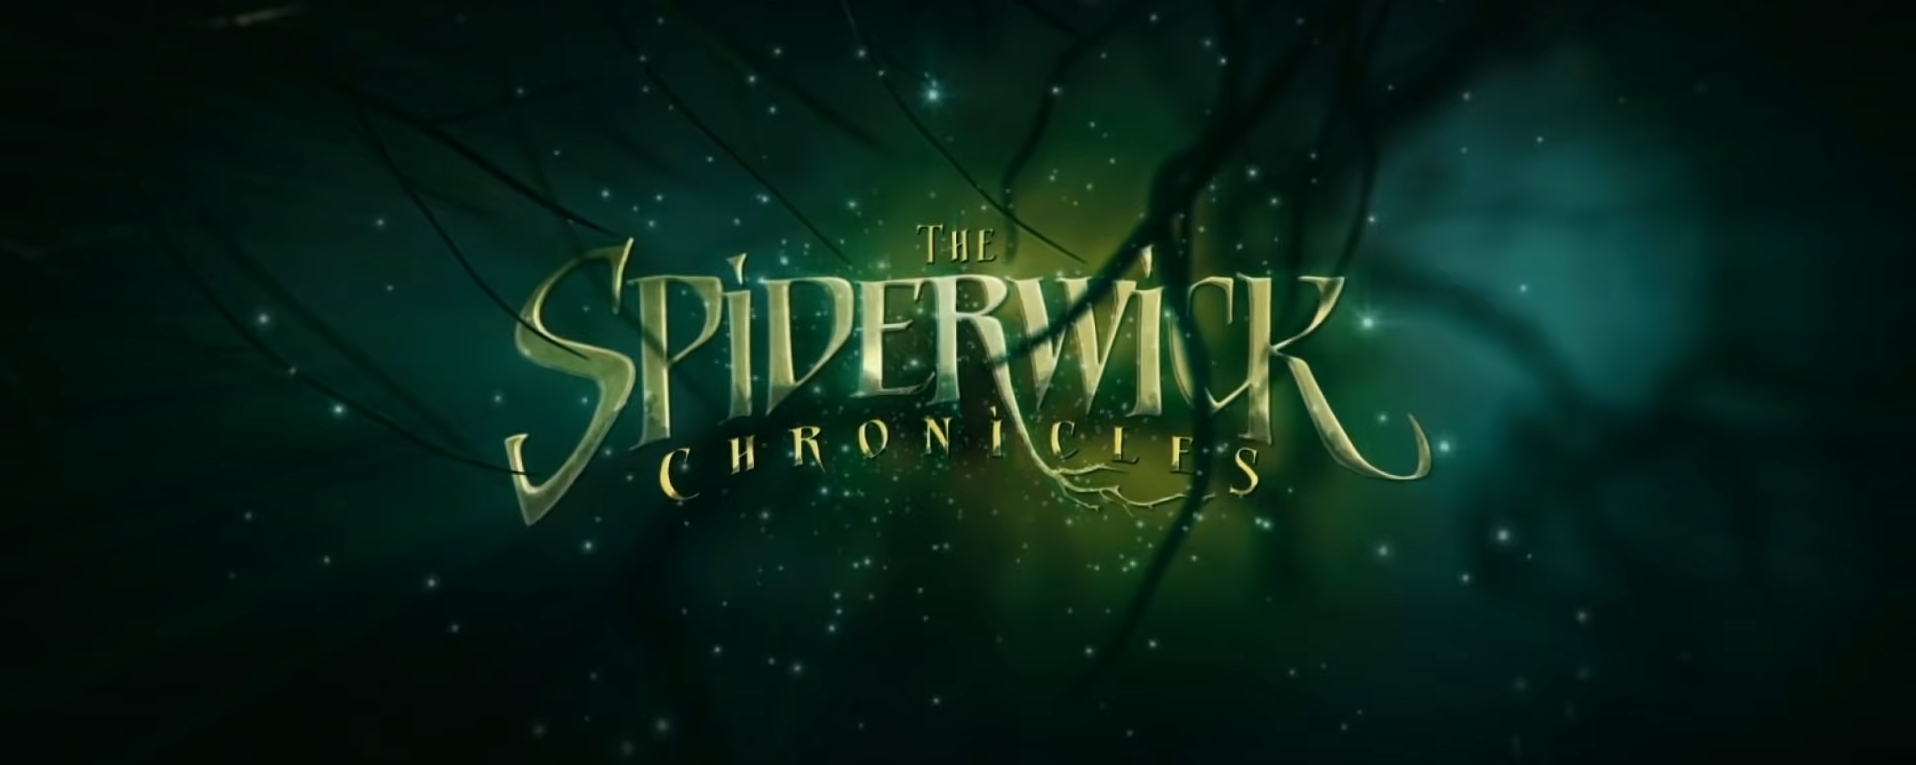 'The Spiderwick Chronicles' Releases New Sneak Peek Clip Ahead Of Its Premiere